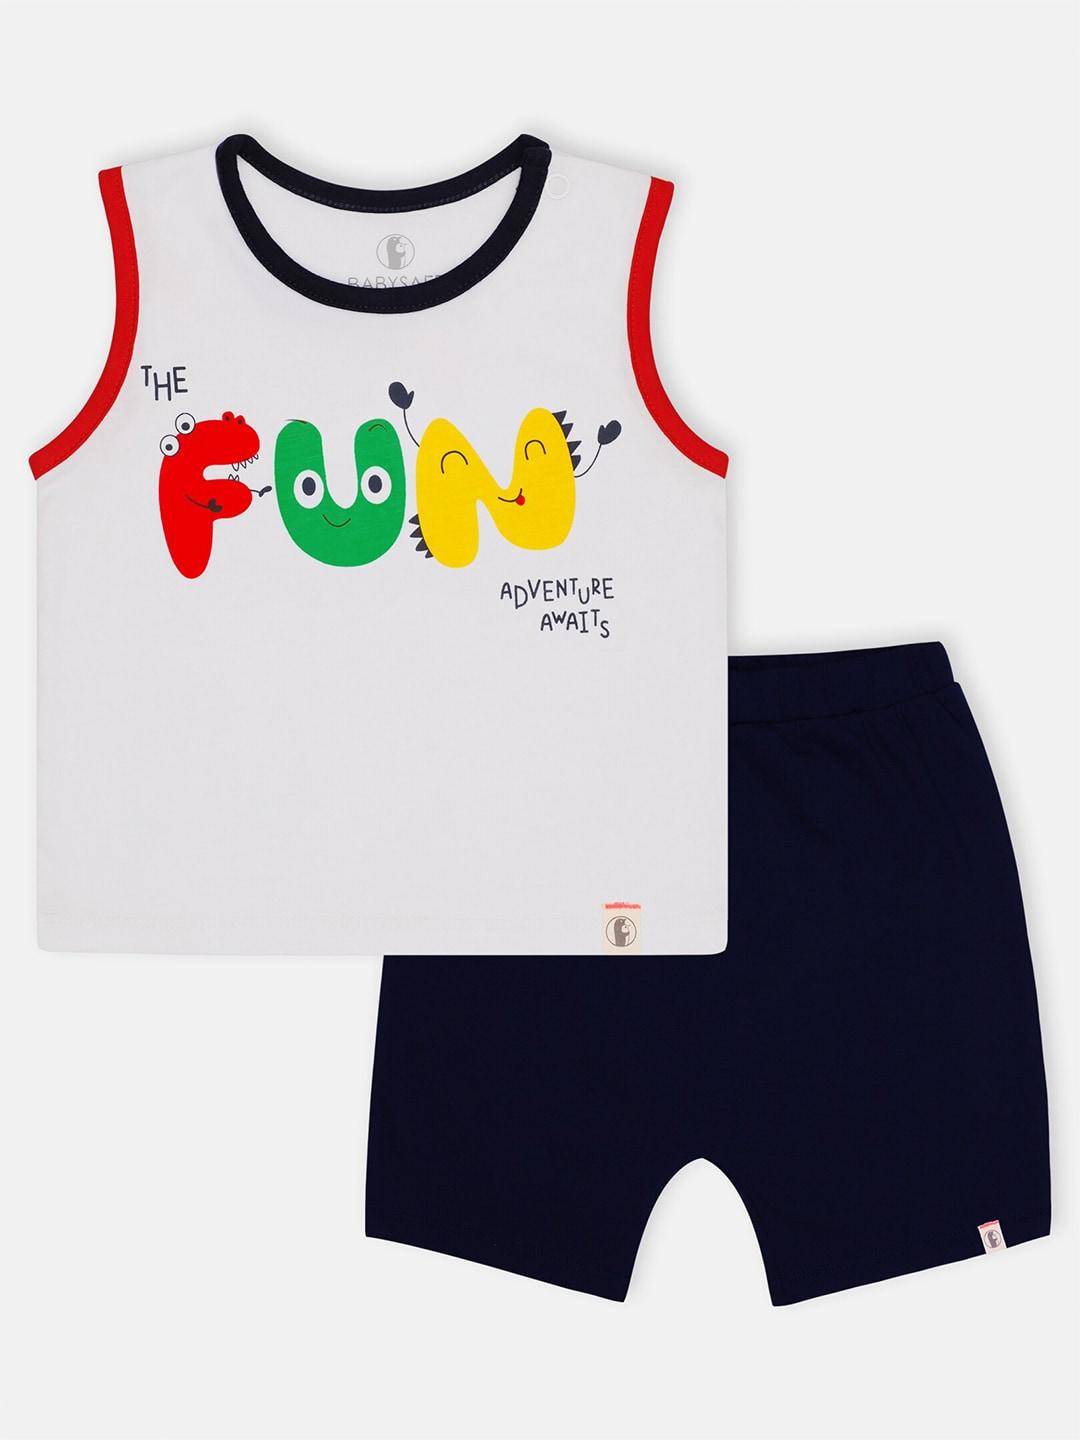 babysafe boys printed pure cotton top with shorts